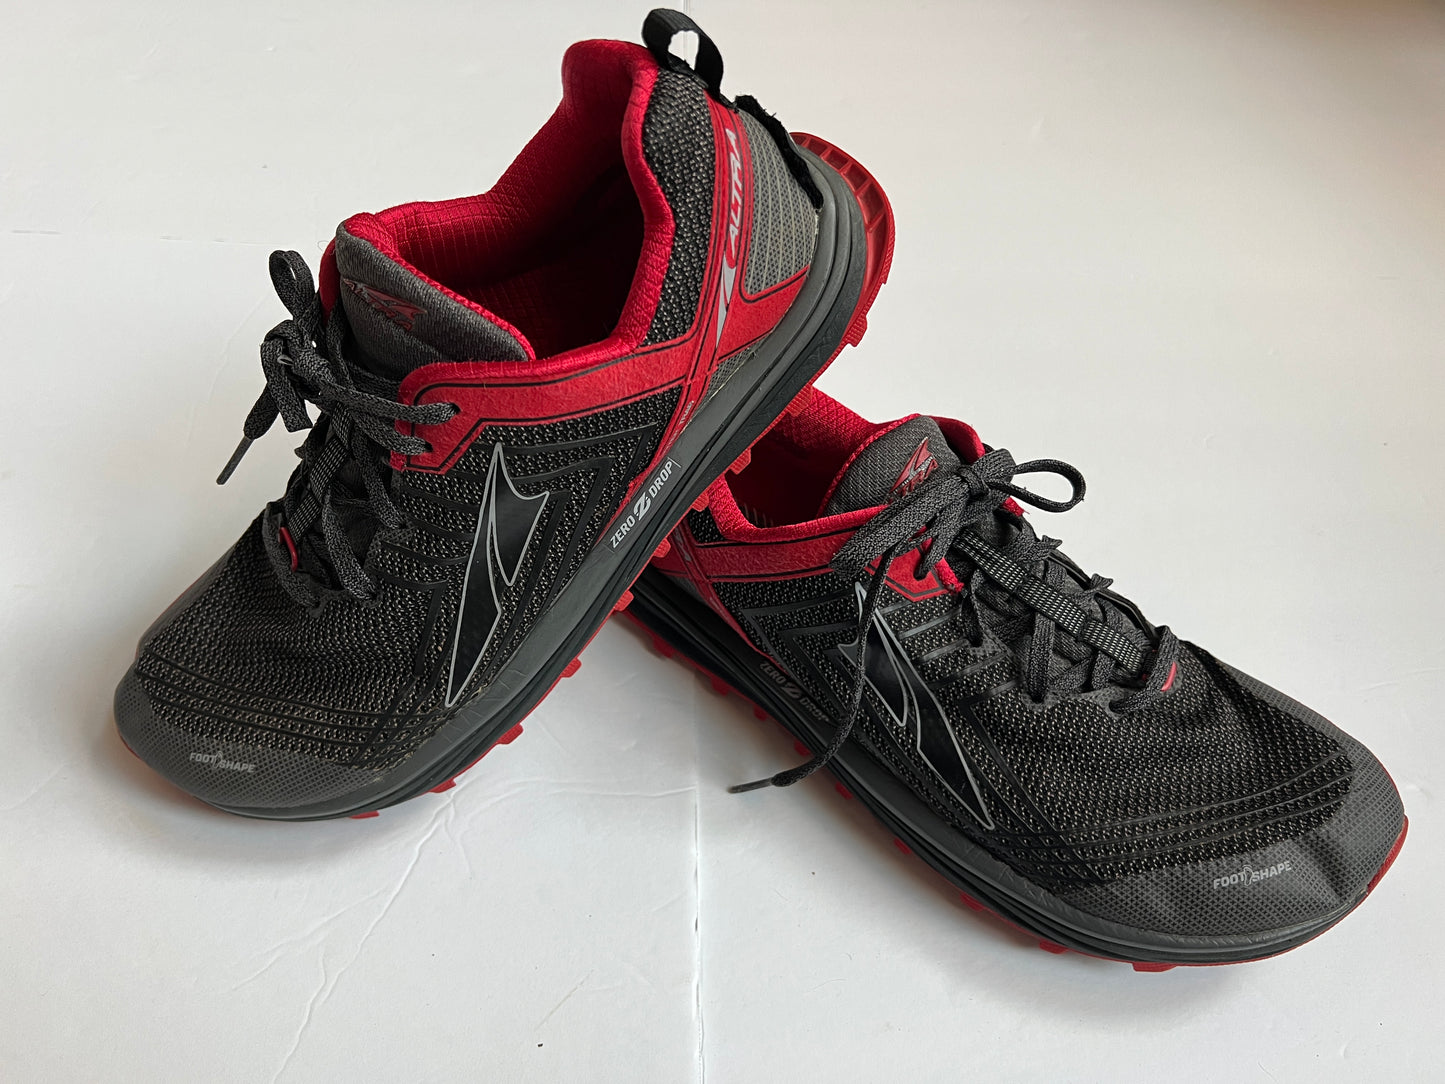 Mens Shoe Size 11.5 Altra Red and black running show